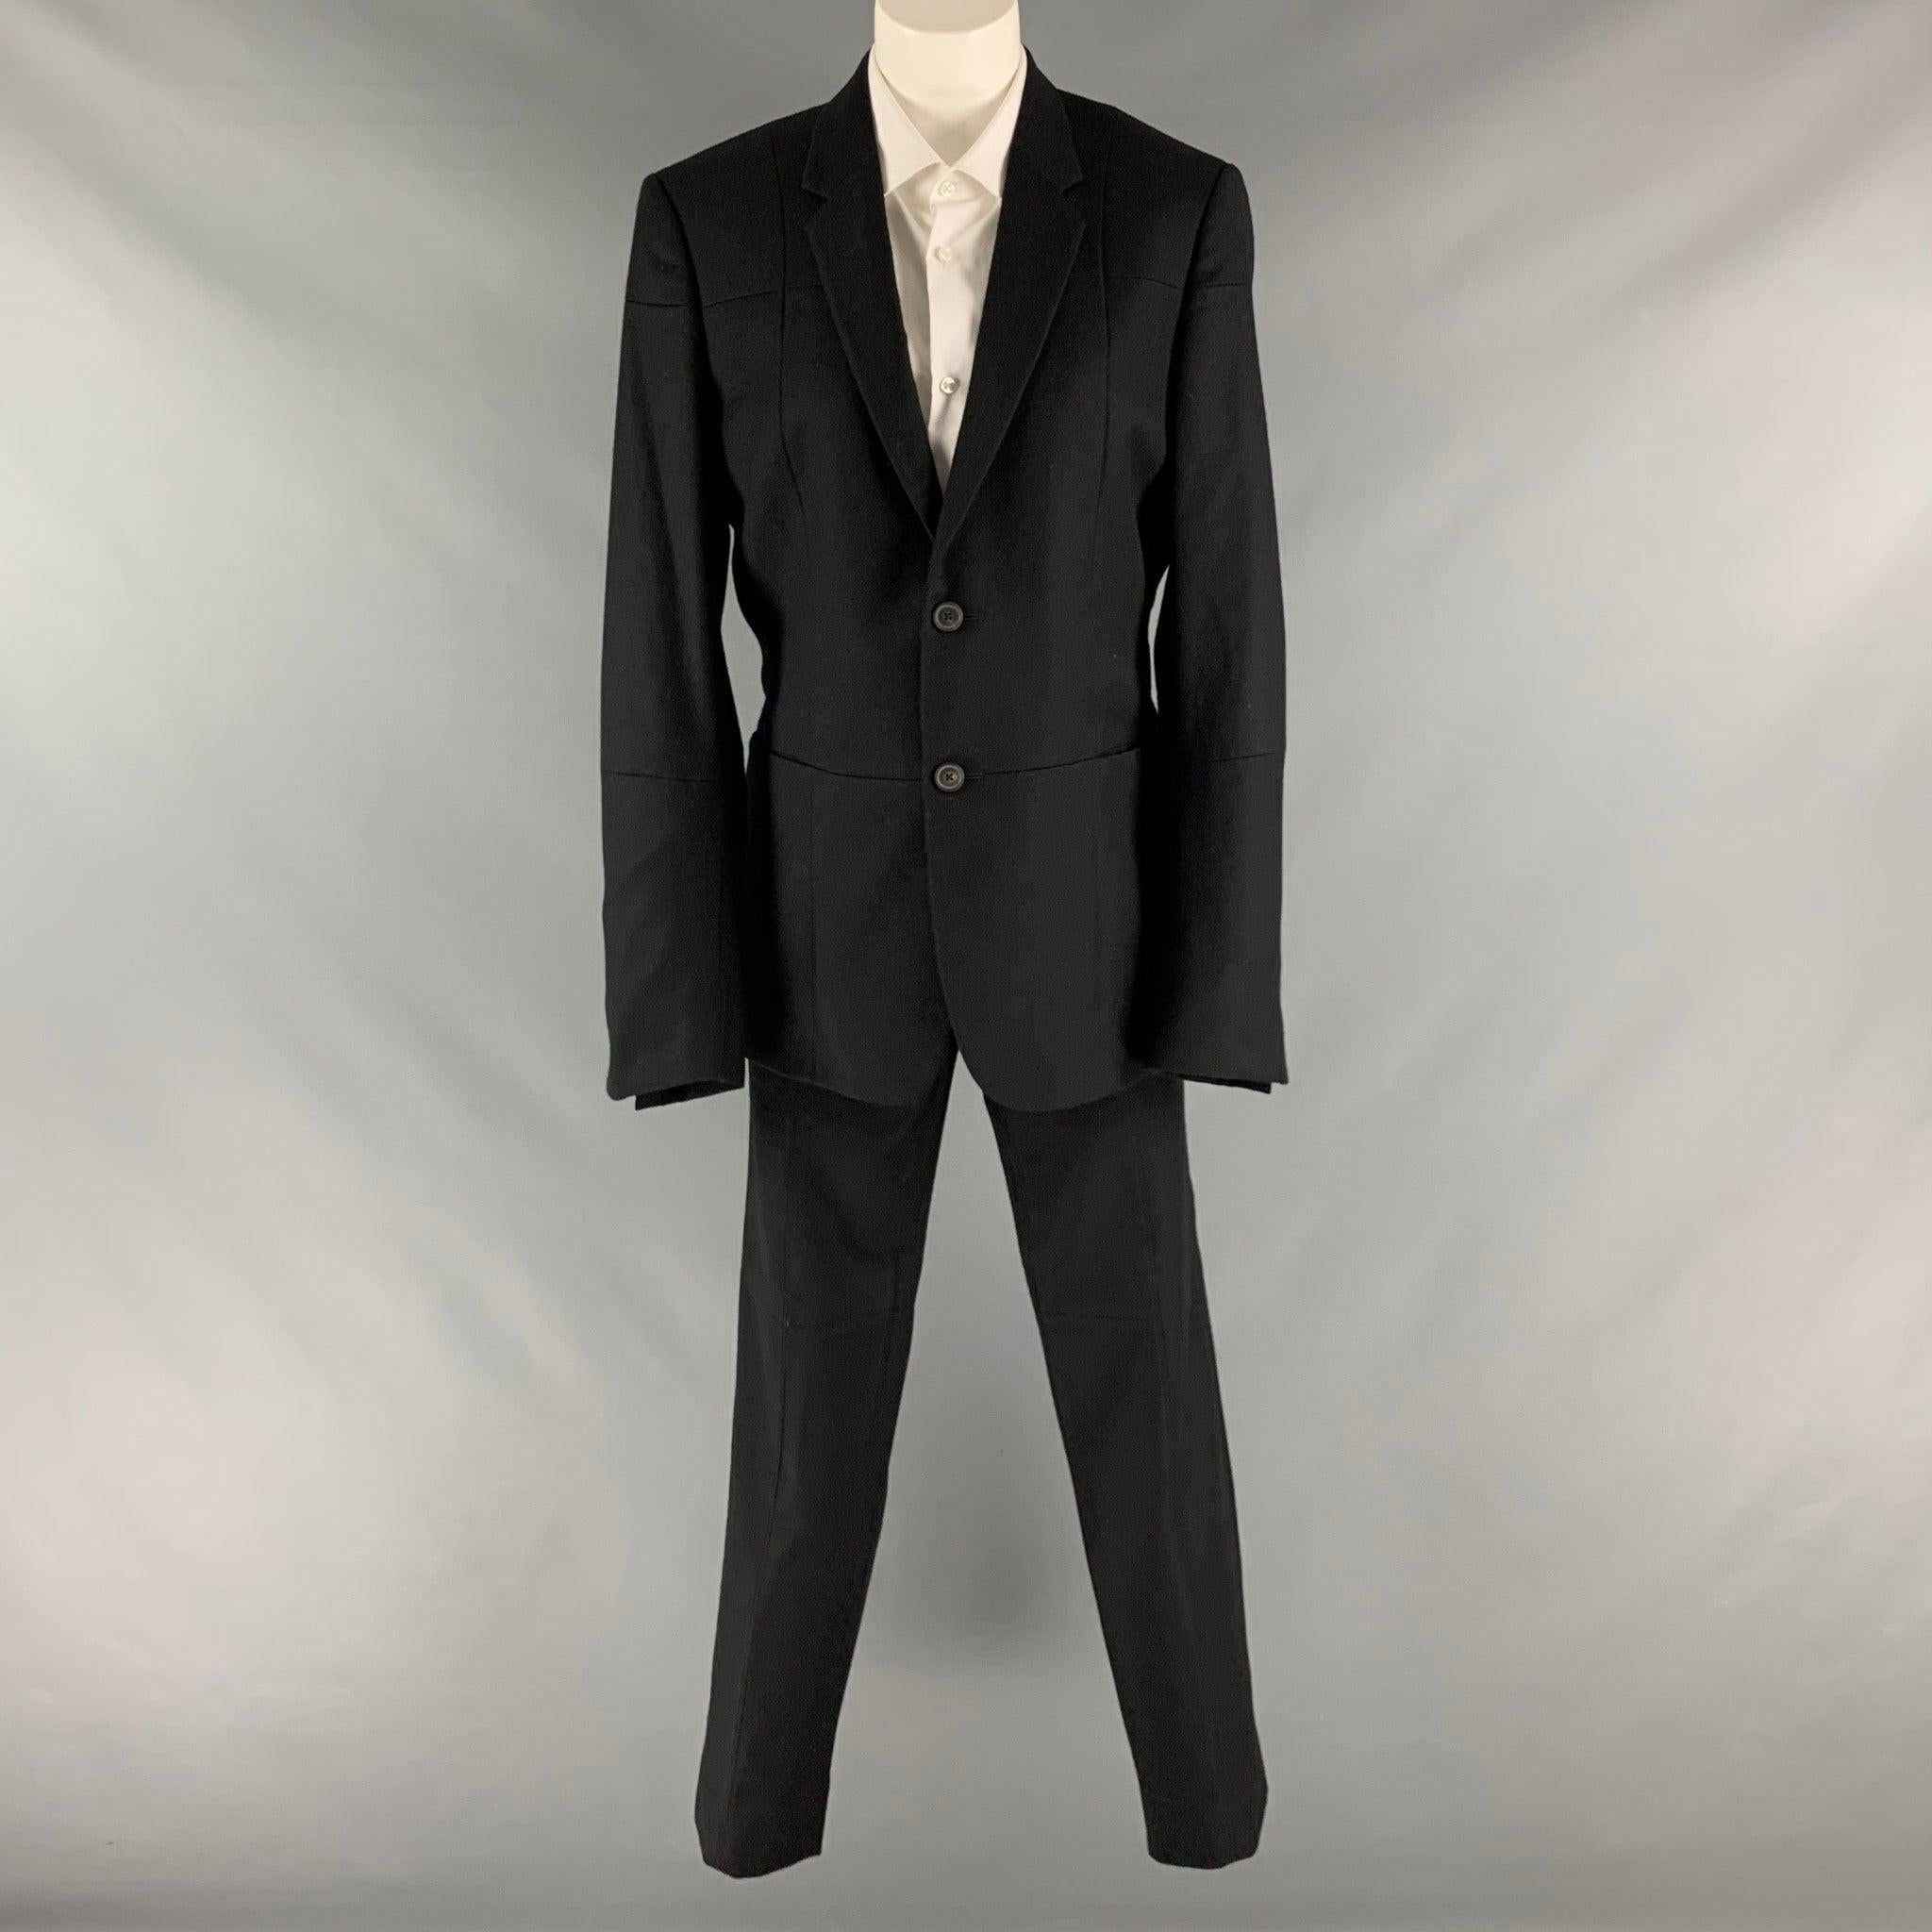 JIL SANDER suit comes in a black wool warm material and includes a single breasted, double button sport coat with a notch lapel, patchwork details and matching flat front trousers. Made in Italy.Very Good Pre-Owned Condition. Minor mark at back.